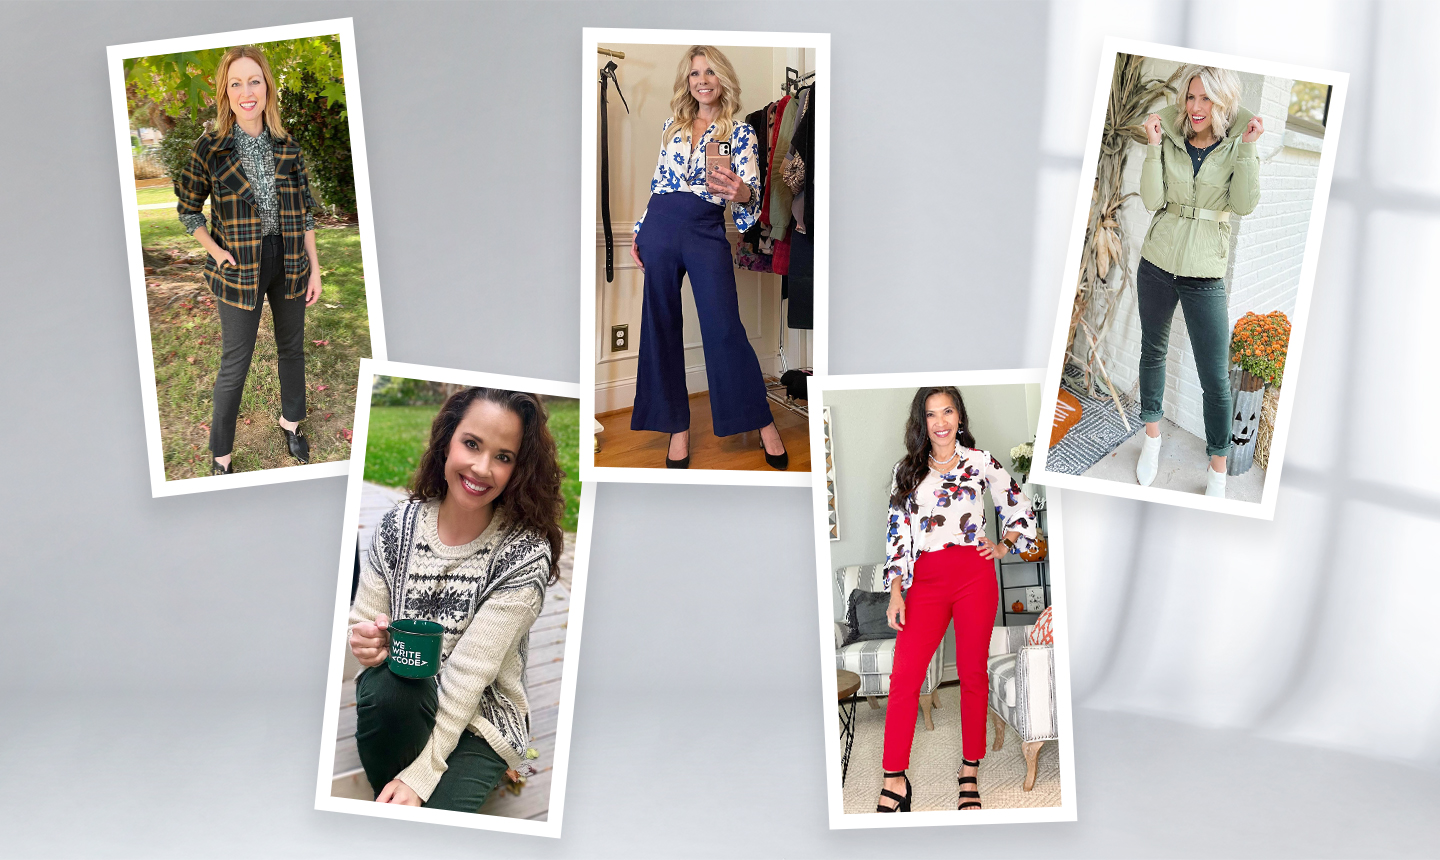 how to know your personal style - Cabi Spring 2024 Collection